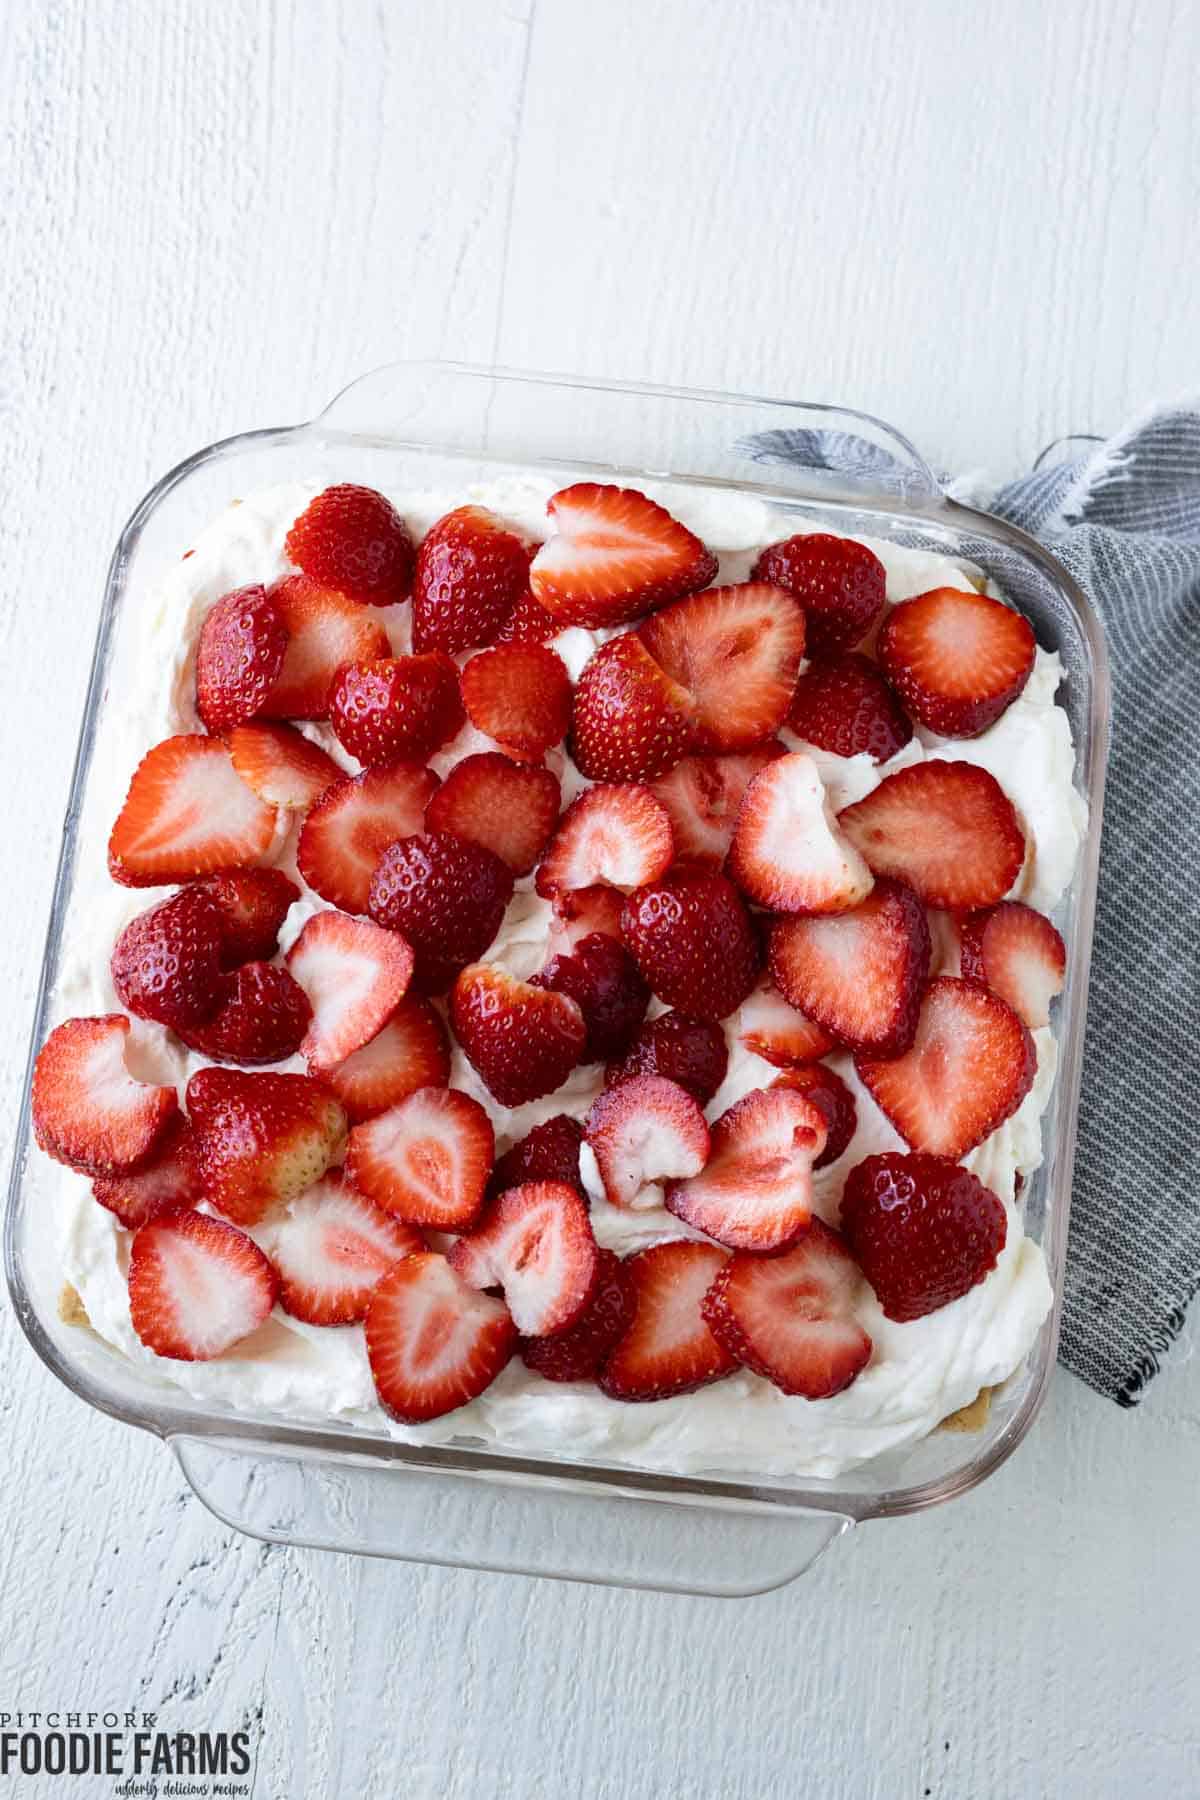 A cream cheese icebox cake with sliced fresh strawberries on top